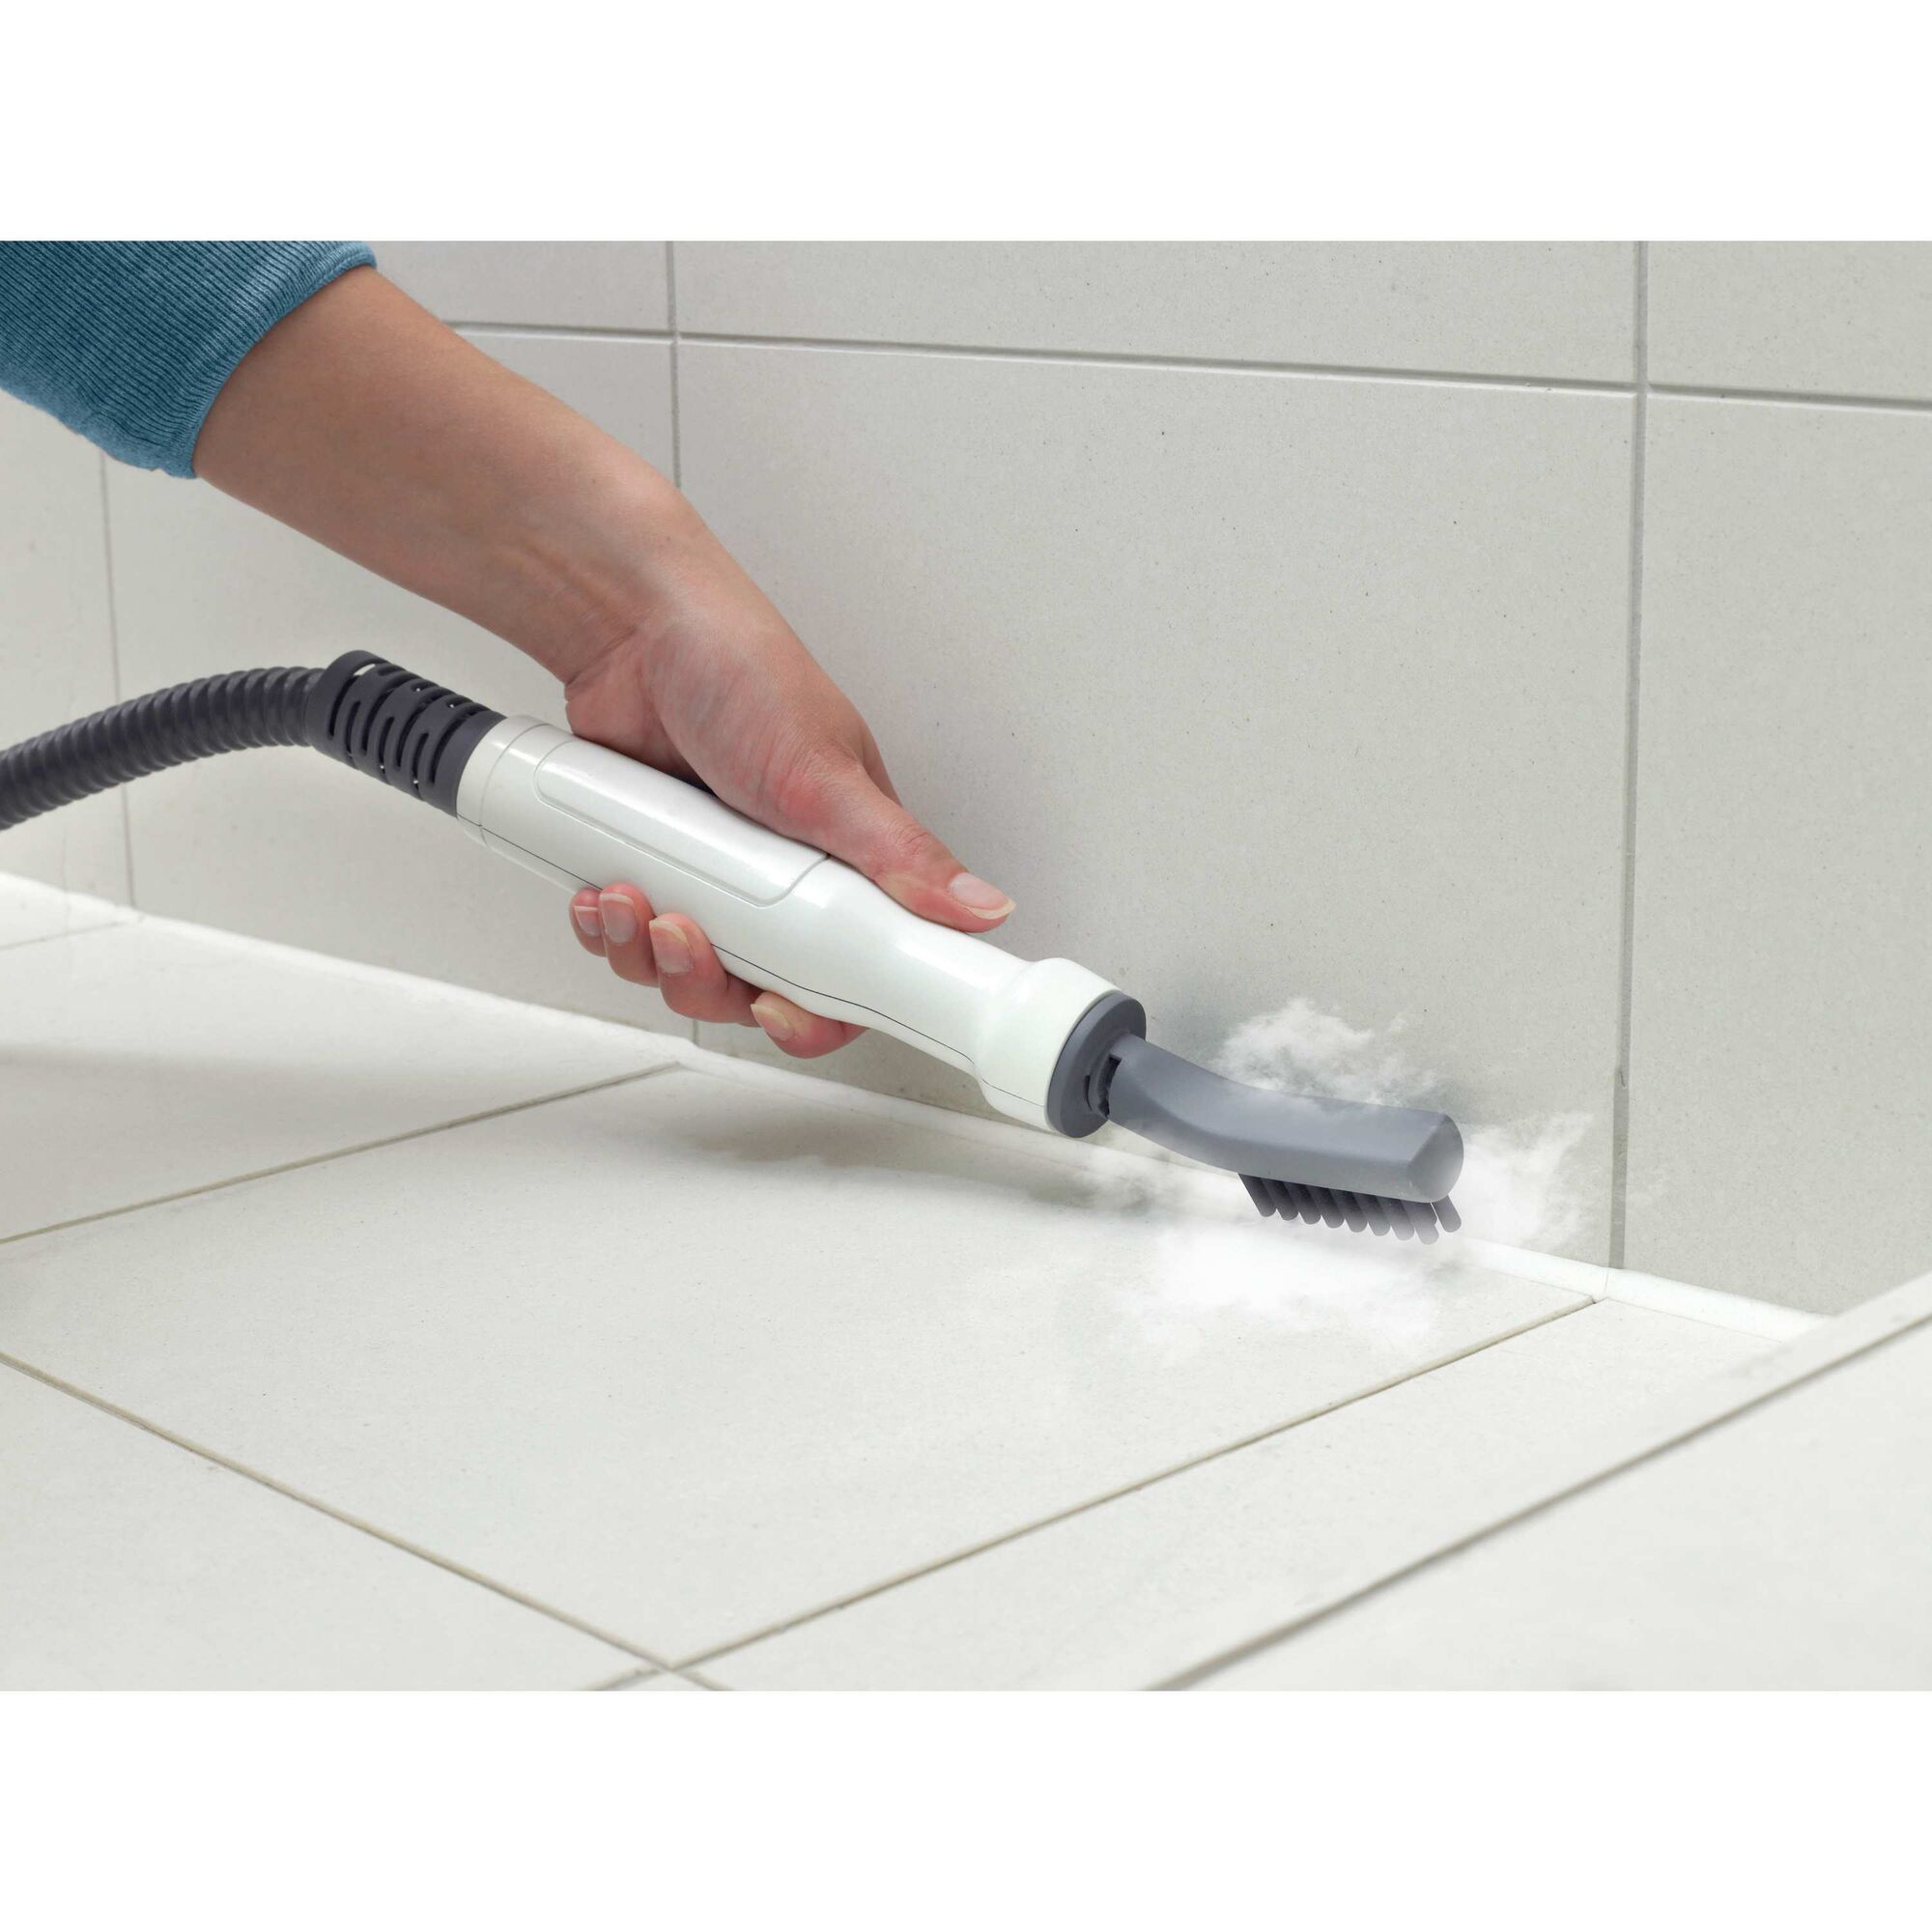 Person cleaning bathroom grout with steam cleaning accessory